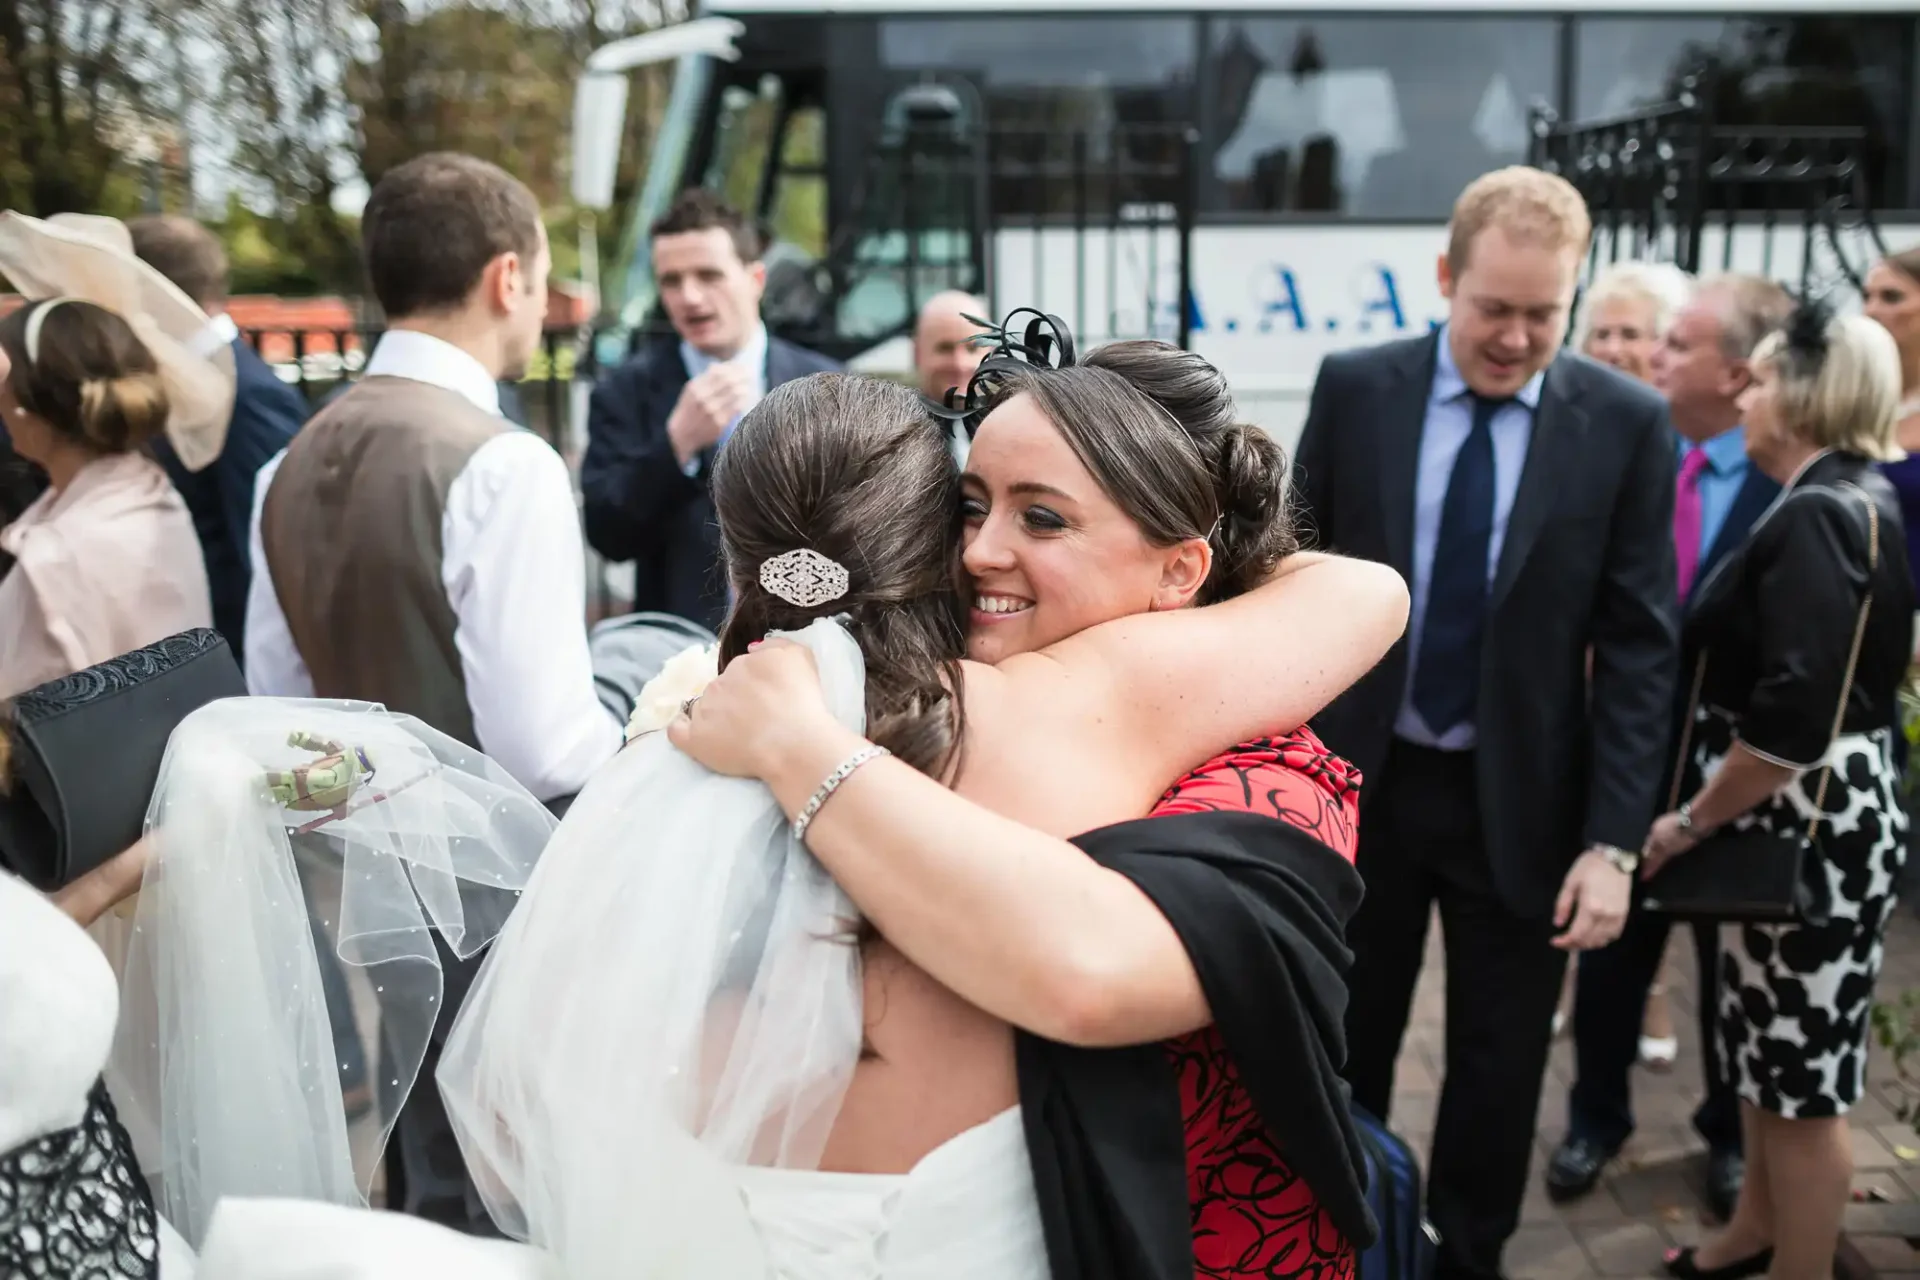 A bride in a white dress receives a warm embrace from a woman in a black and red outfit at a wedding gathering with guests around them.